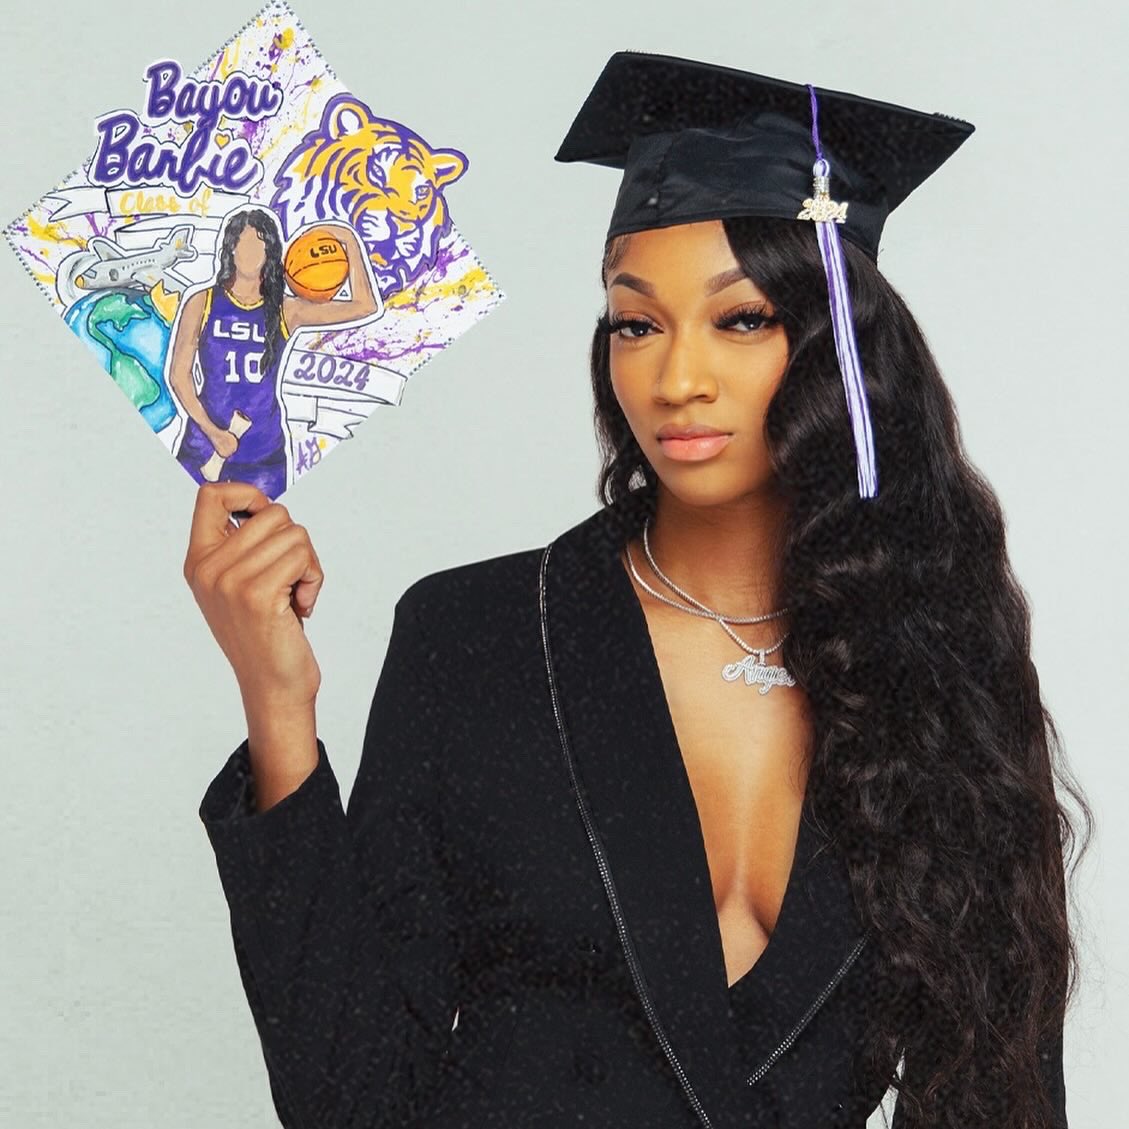 Chicago Sky rookie Angel Reese has officially graduated from LSU with a Bachelor's degree in Interdisciplinary Studies with concentrations and minors in Communication Studies, Leadership Development and Psychology 🙌

(via @Reese10Angel)